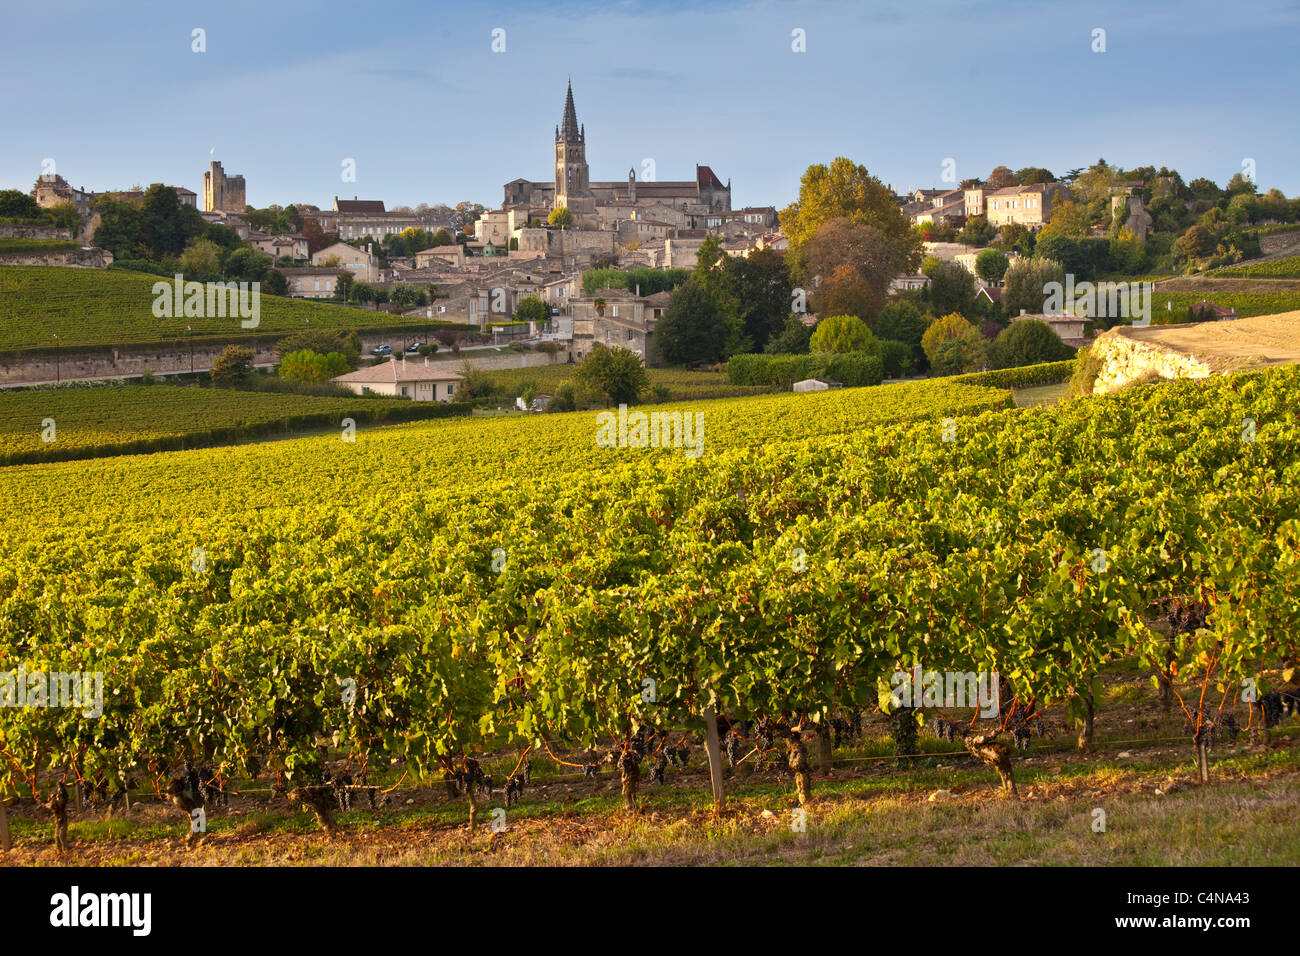 Ripe black grapes in vineyard and the town of St Emilion in the Bordeaux wine region of France Stock Photo